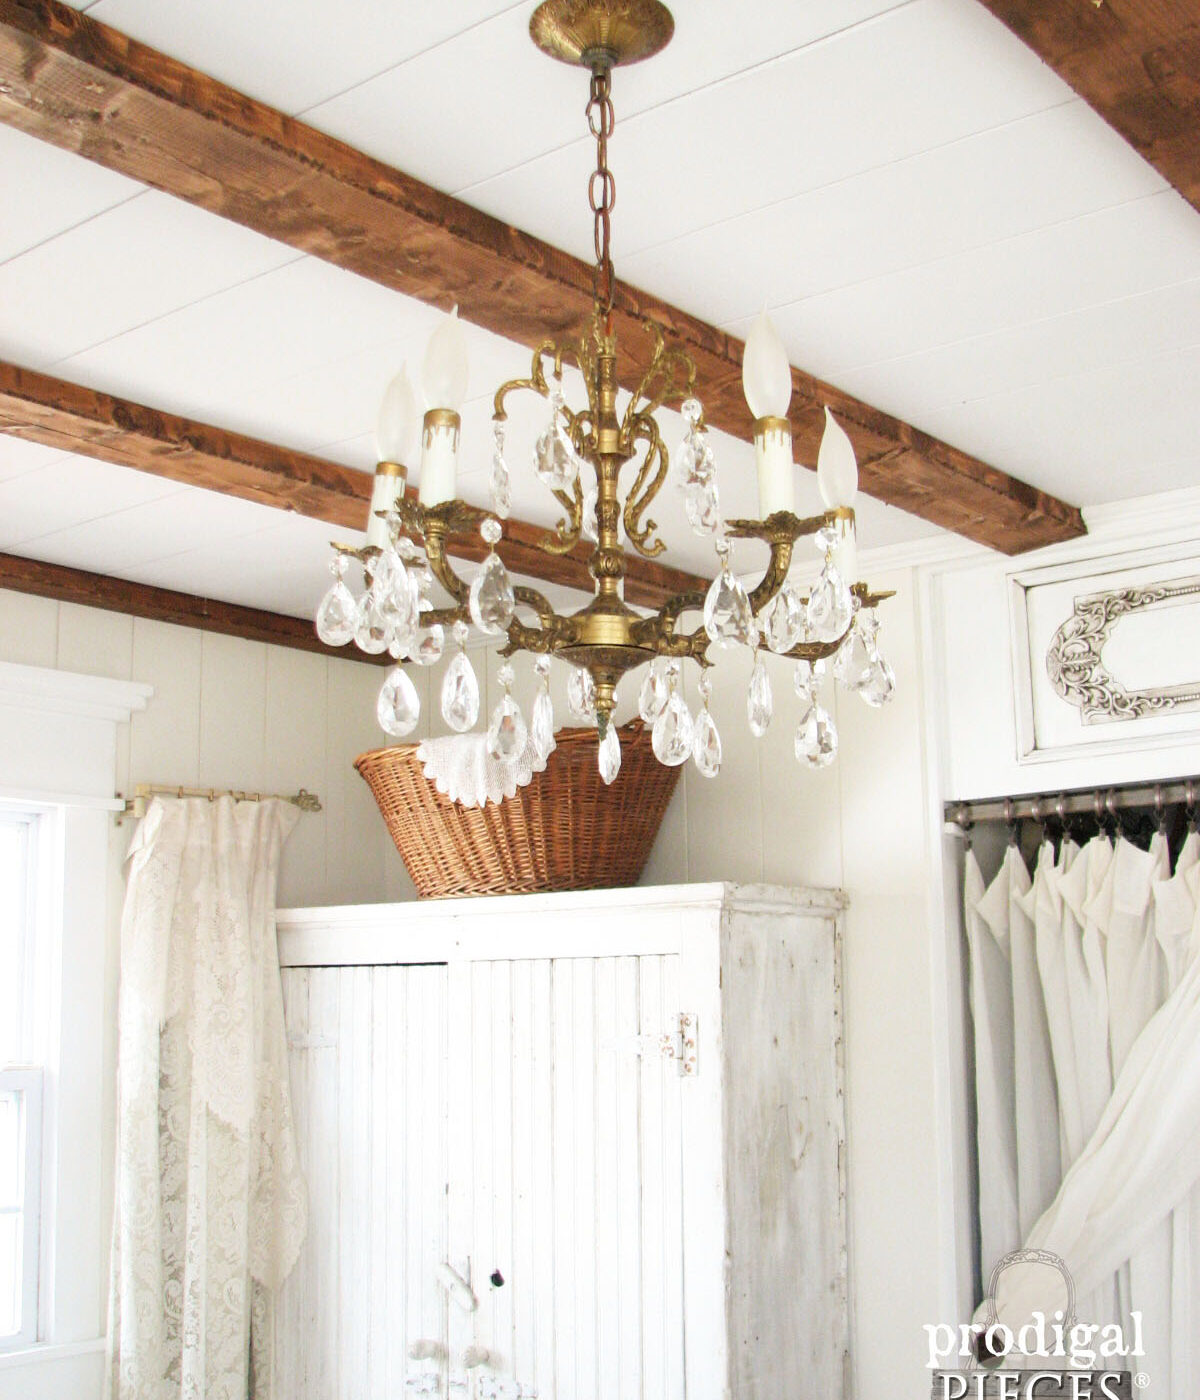 Antique Brass Chandelier with Crystals - Set of 2 available at Prodigal Pieces | shop.prodigalpieces.com #prodigalpieces